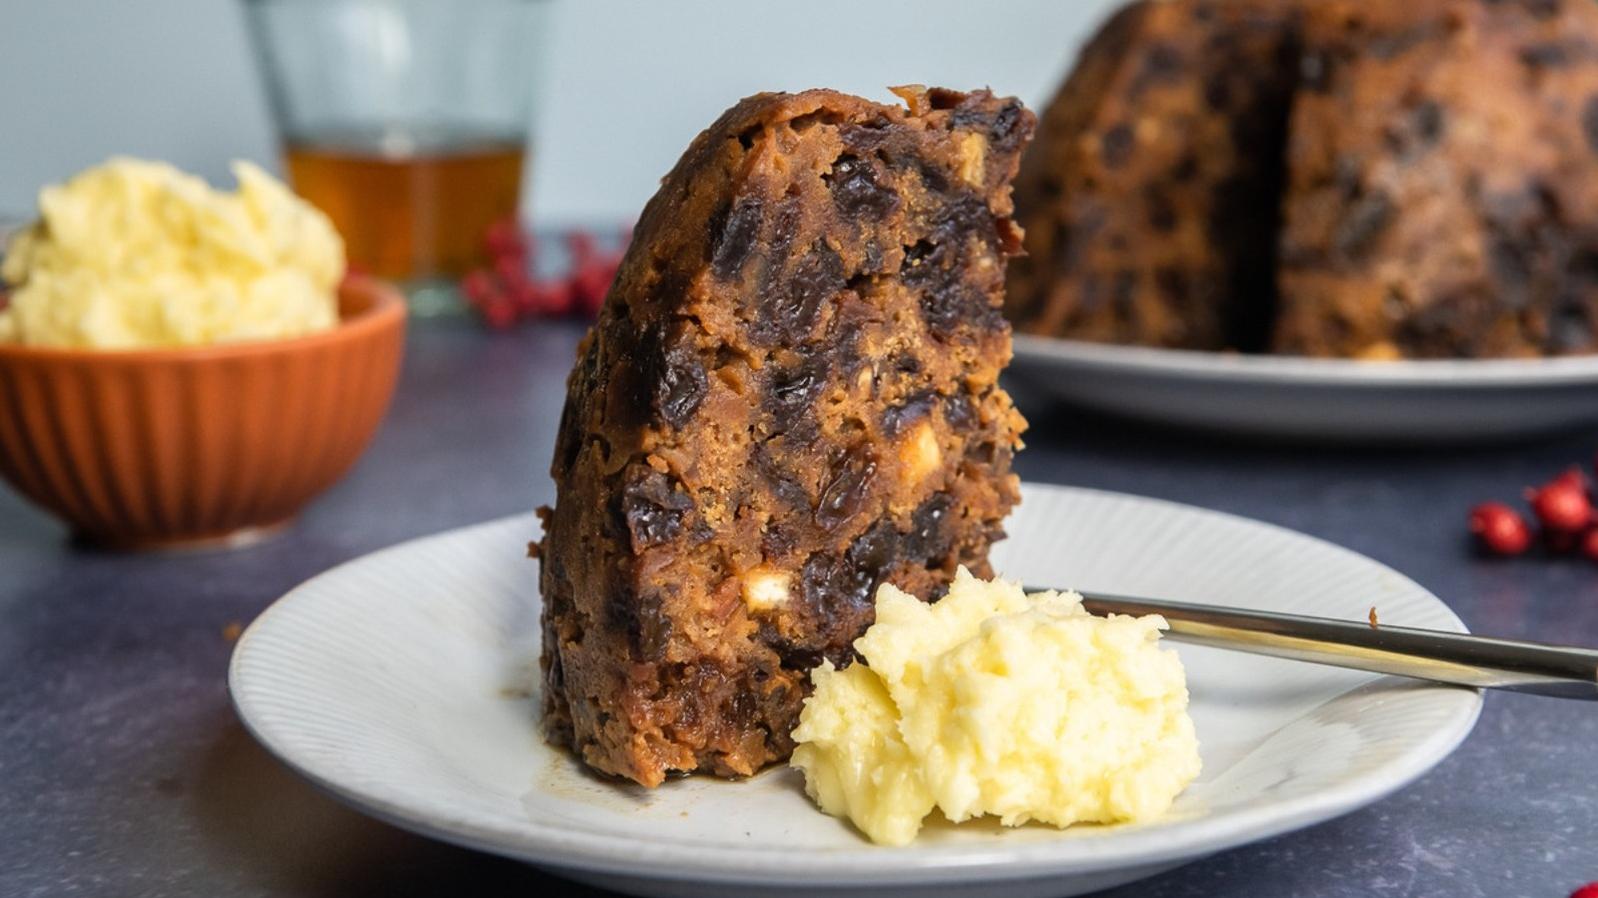  This classic British pudding is the perfect way to round out a festive meal.